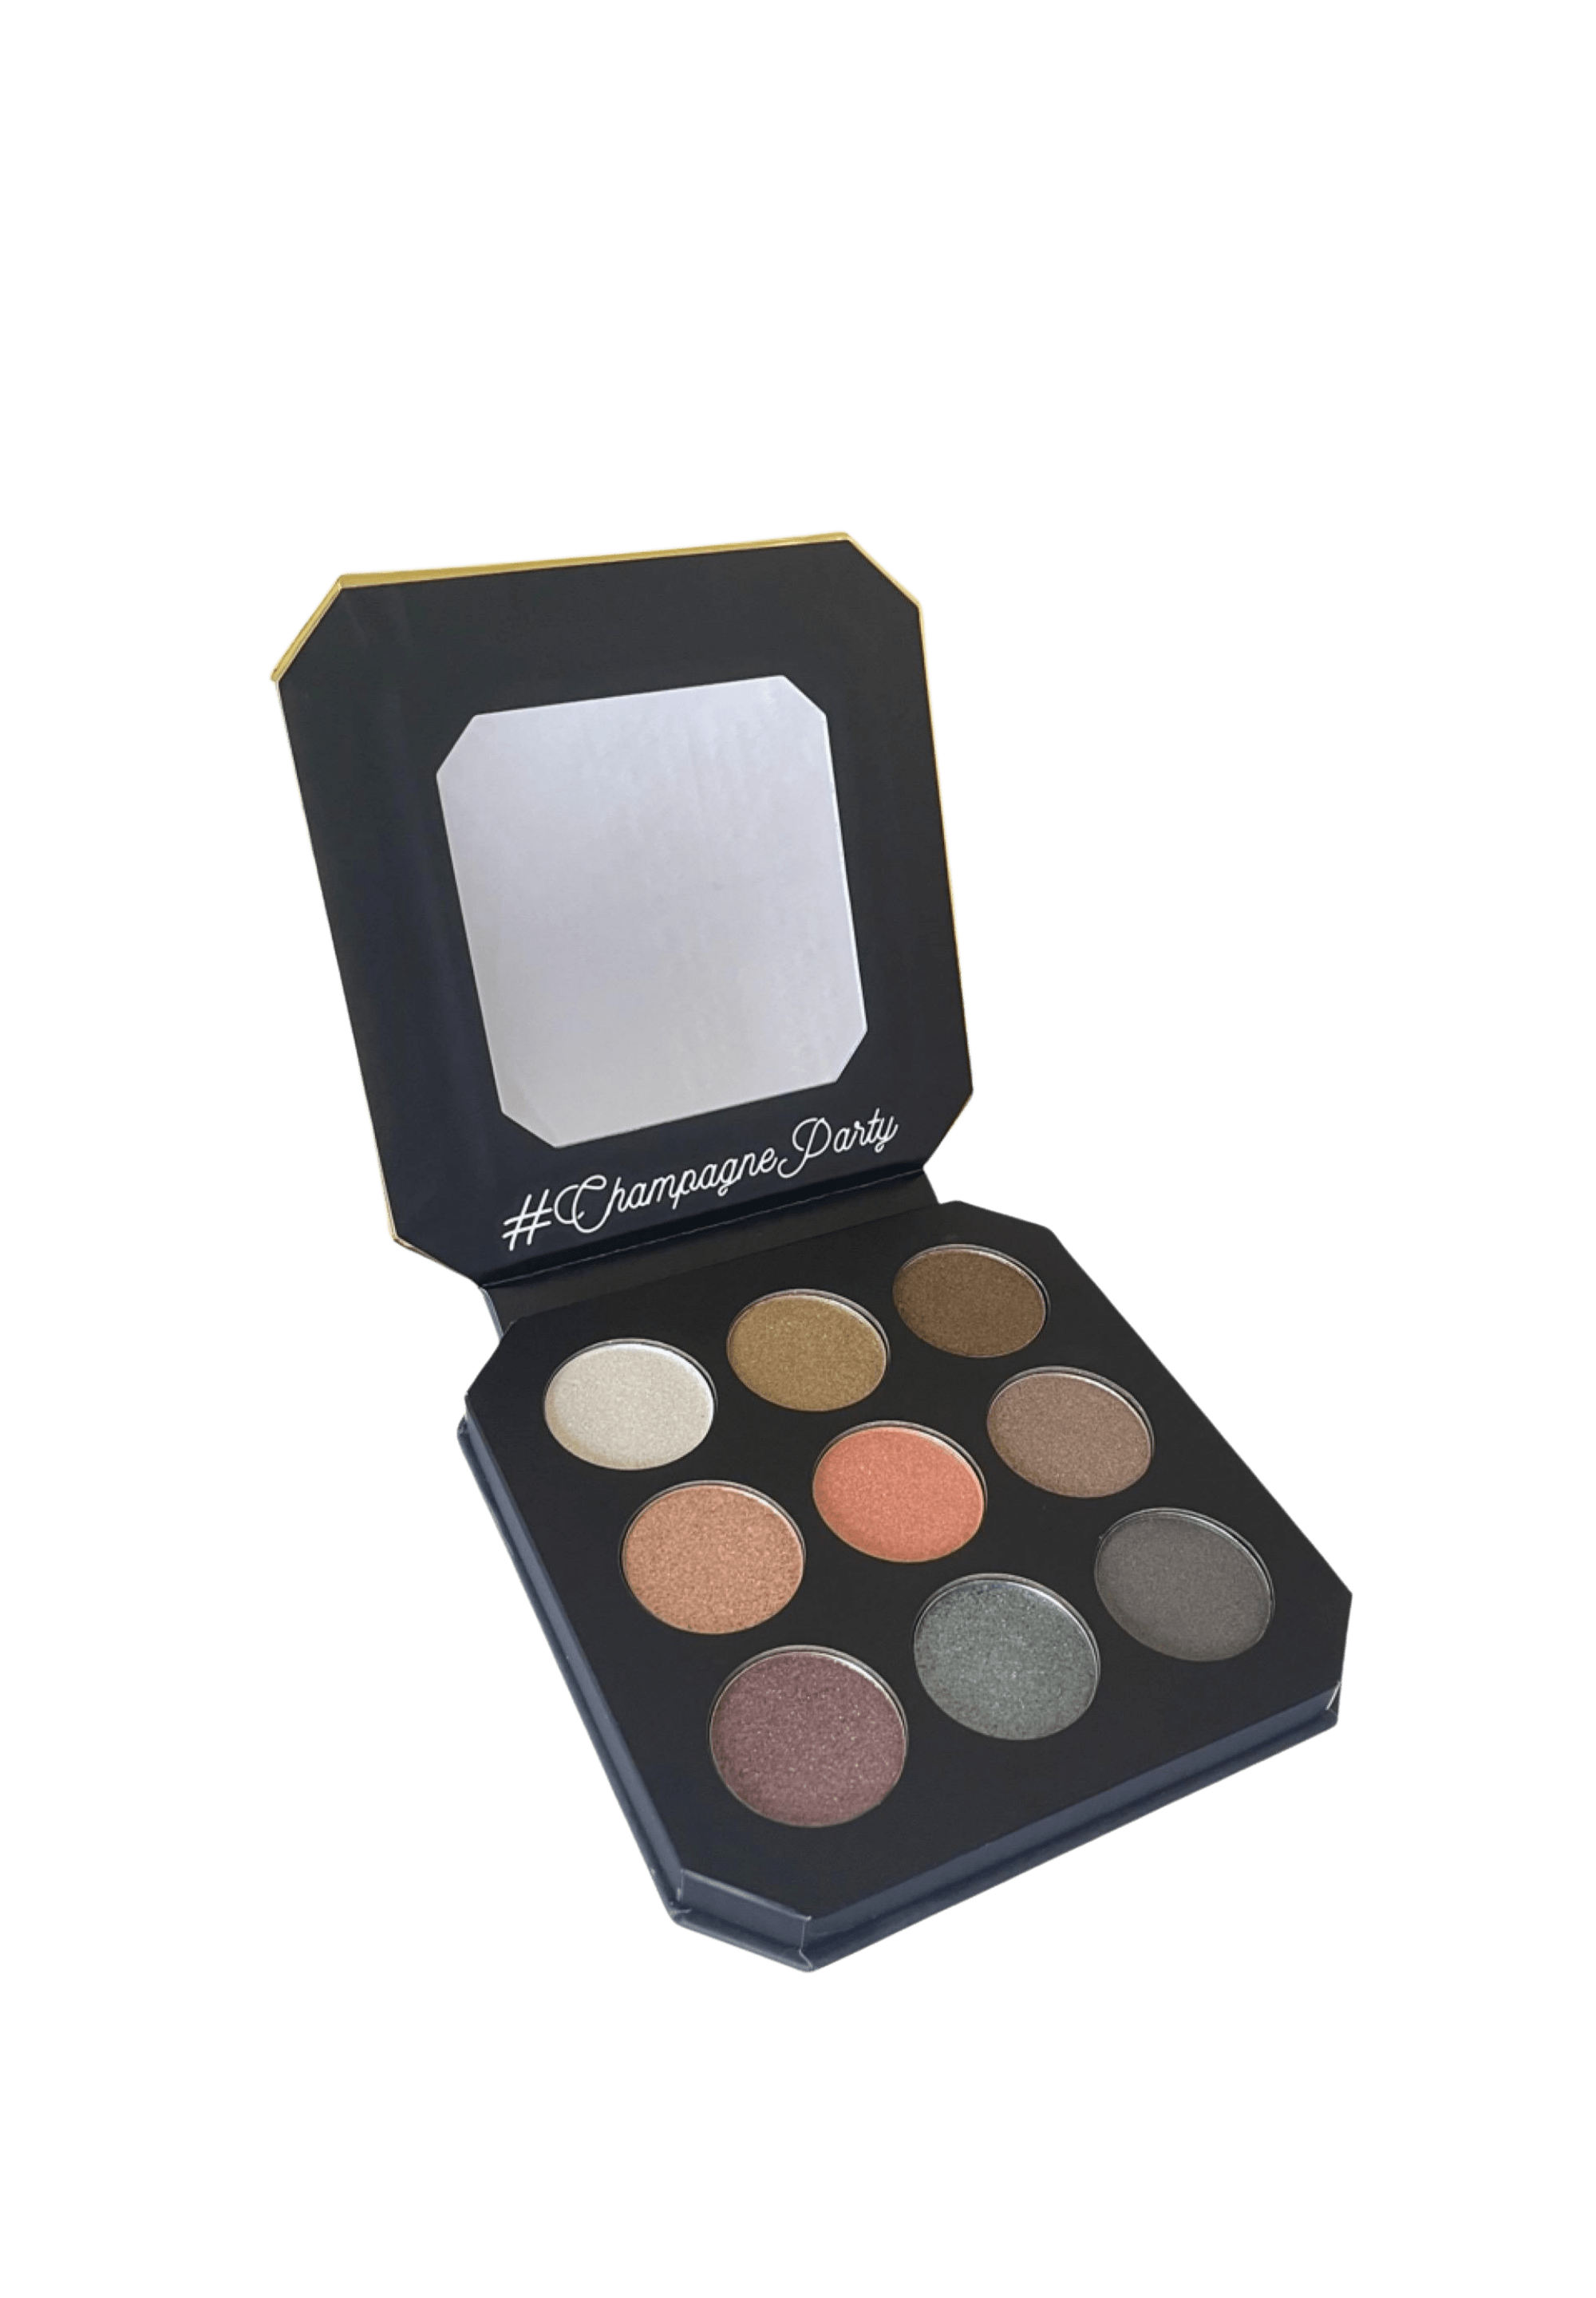 THE BEAUTY WORX Palette 31 Champagne Party Eeyshadow 14.4g